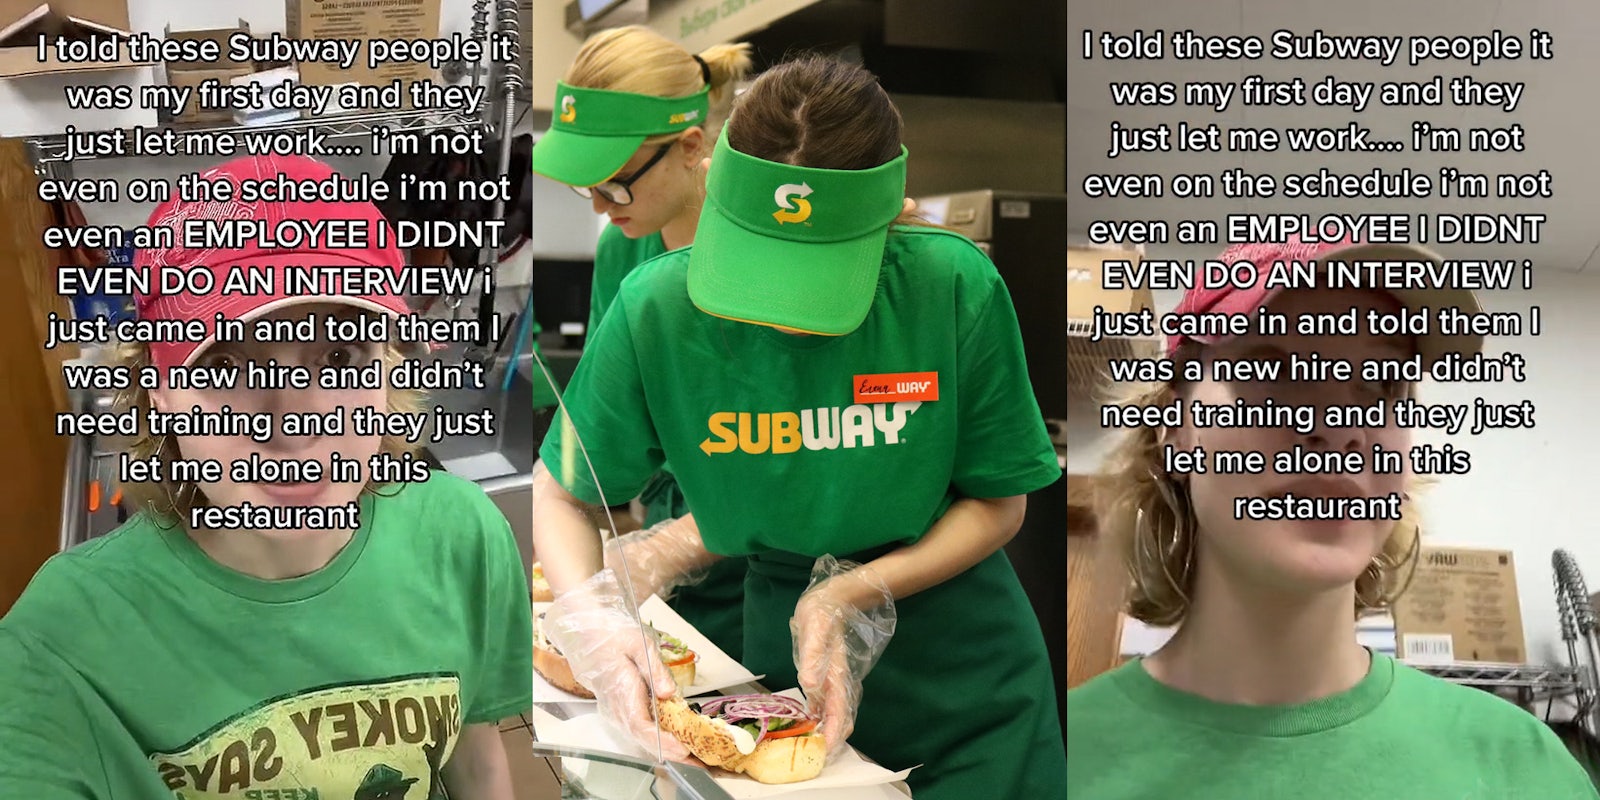 Woman standing in Subway caption 'I told these Subway people it was my first day and they just let me work... i'm not even on the schedule i'm not evan an EMPLOYEE I DIDNT EVEN DO AN INTERVIEW i just came in and told them I was a new hire and didn't need training and they just let me alone in this restaurant' (l) woman working at Subway creating sandwich (c) Woman standing in Subway caption 'I told these Subway people it was my first day and they just let me work... i'm not even on the schedule i'm not evan an EMPLOYEE I DIDNT EVEN DO AN INTERVIEW i just came in and told them I was a new hire and didn't need training and they just let me alone in this restaurant' (r)